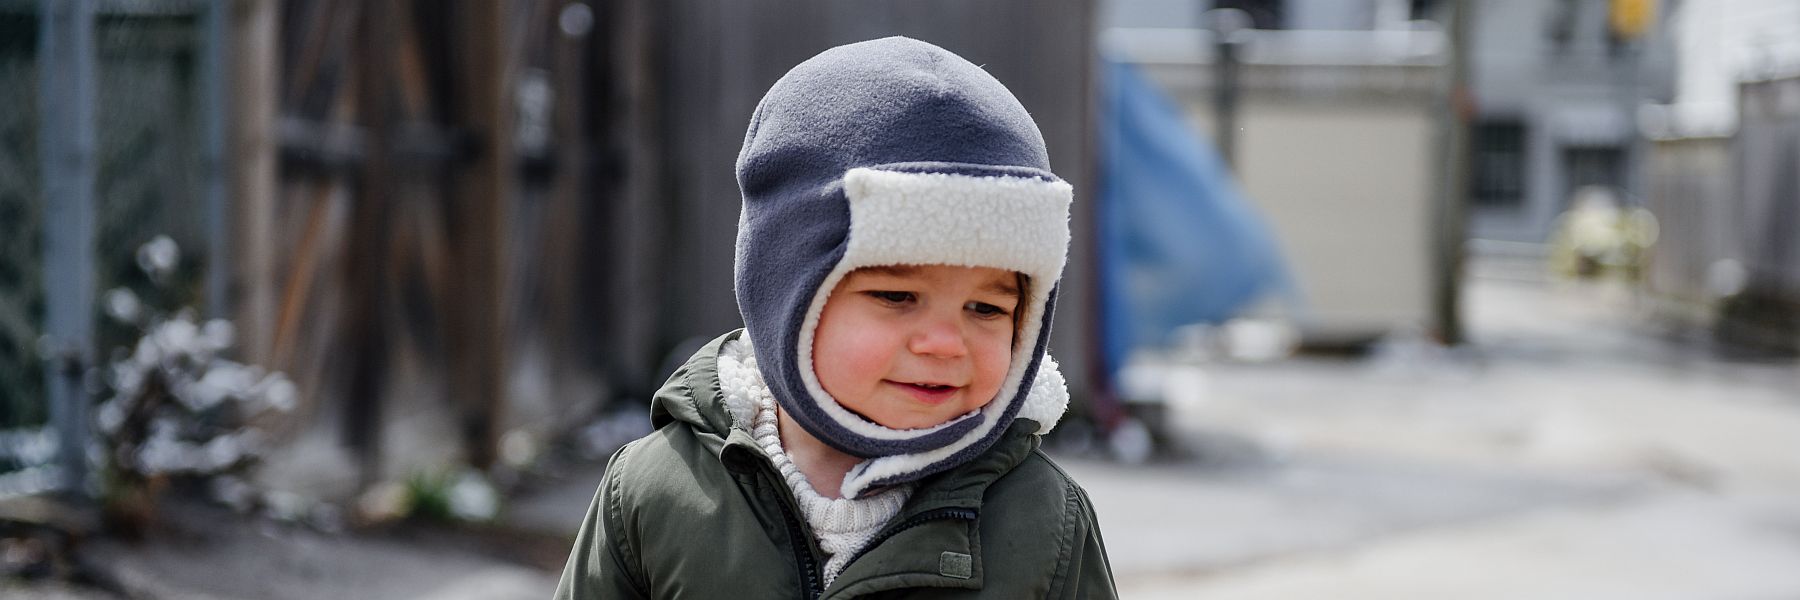 Puffin Gear had made kids hats for over 25 years in Canada. Designed for warmth so kids will love to play outdoors and become life-long outdoor enthusiasts-Polartec Fleece Aviator hat has a sherpa lining and is oh-so cozy. Chinwrap keeps out all the cold